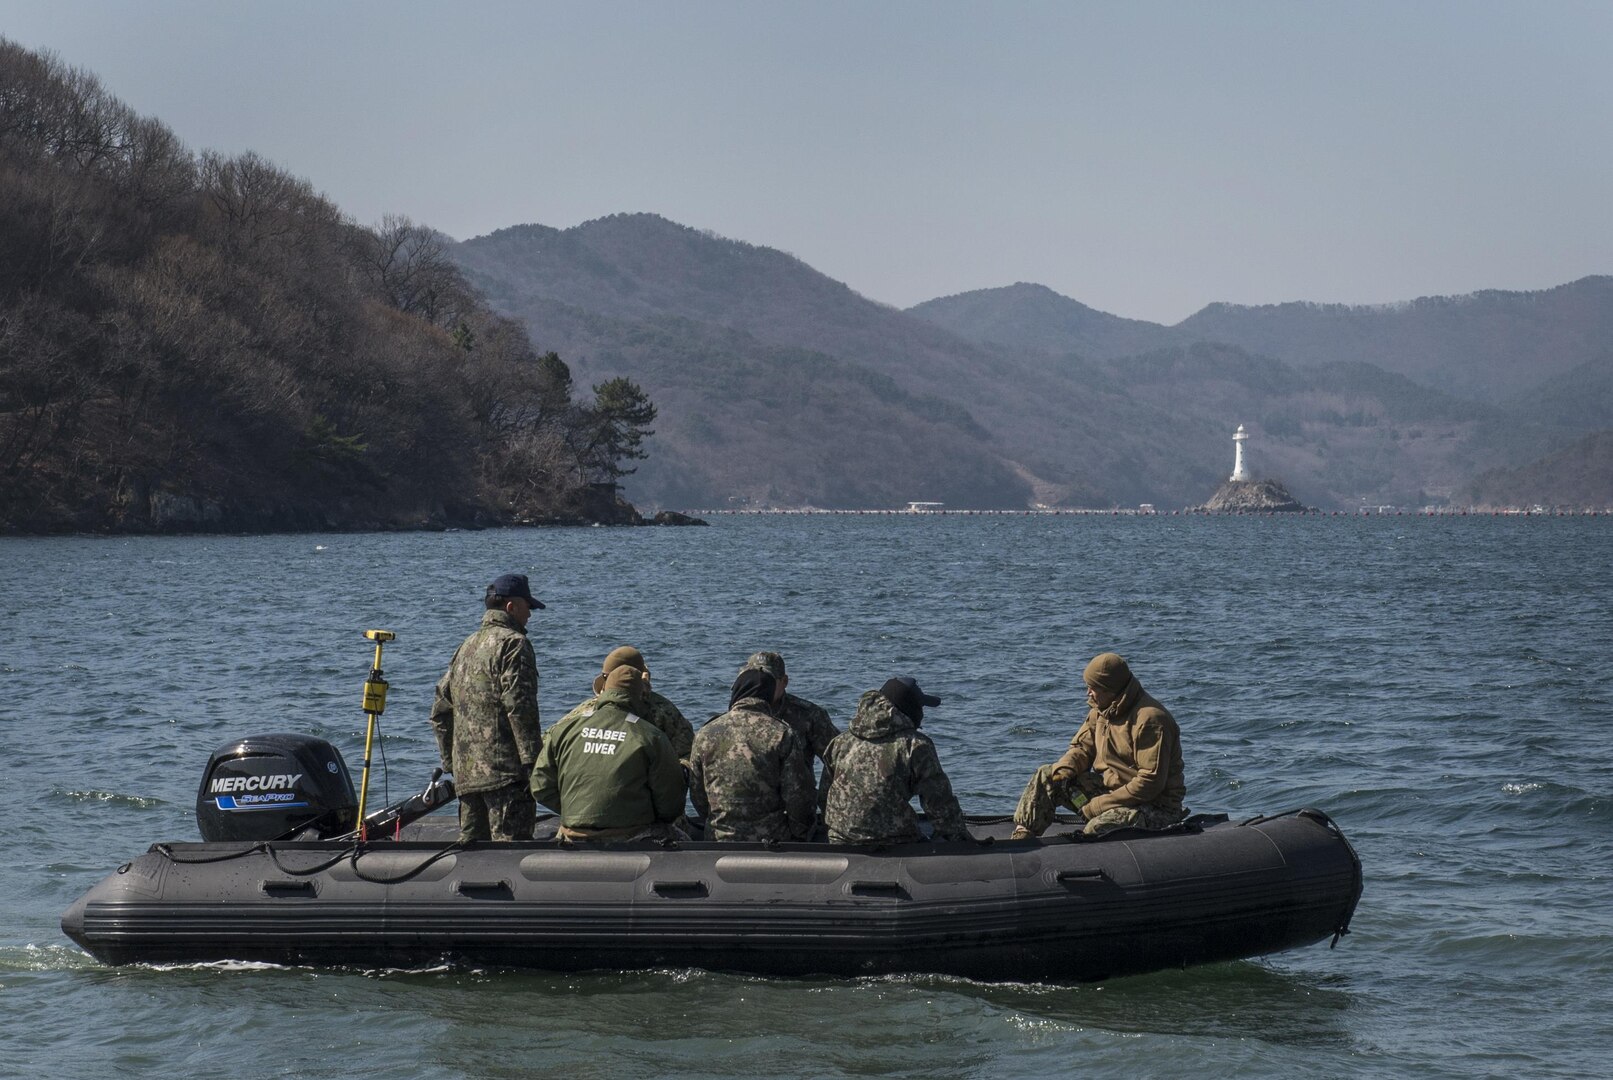 U.S. and South Korean sailors conduct a survey to map ocean floor topography off the coast of Chinhae, South Korea, March 10, 2016, during Exercise Foal Eagle 2016. Navy photo by Petty Officer 1st Class Charles E. White